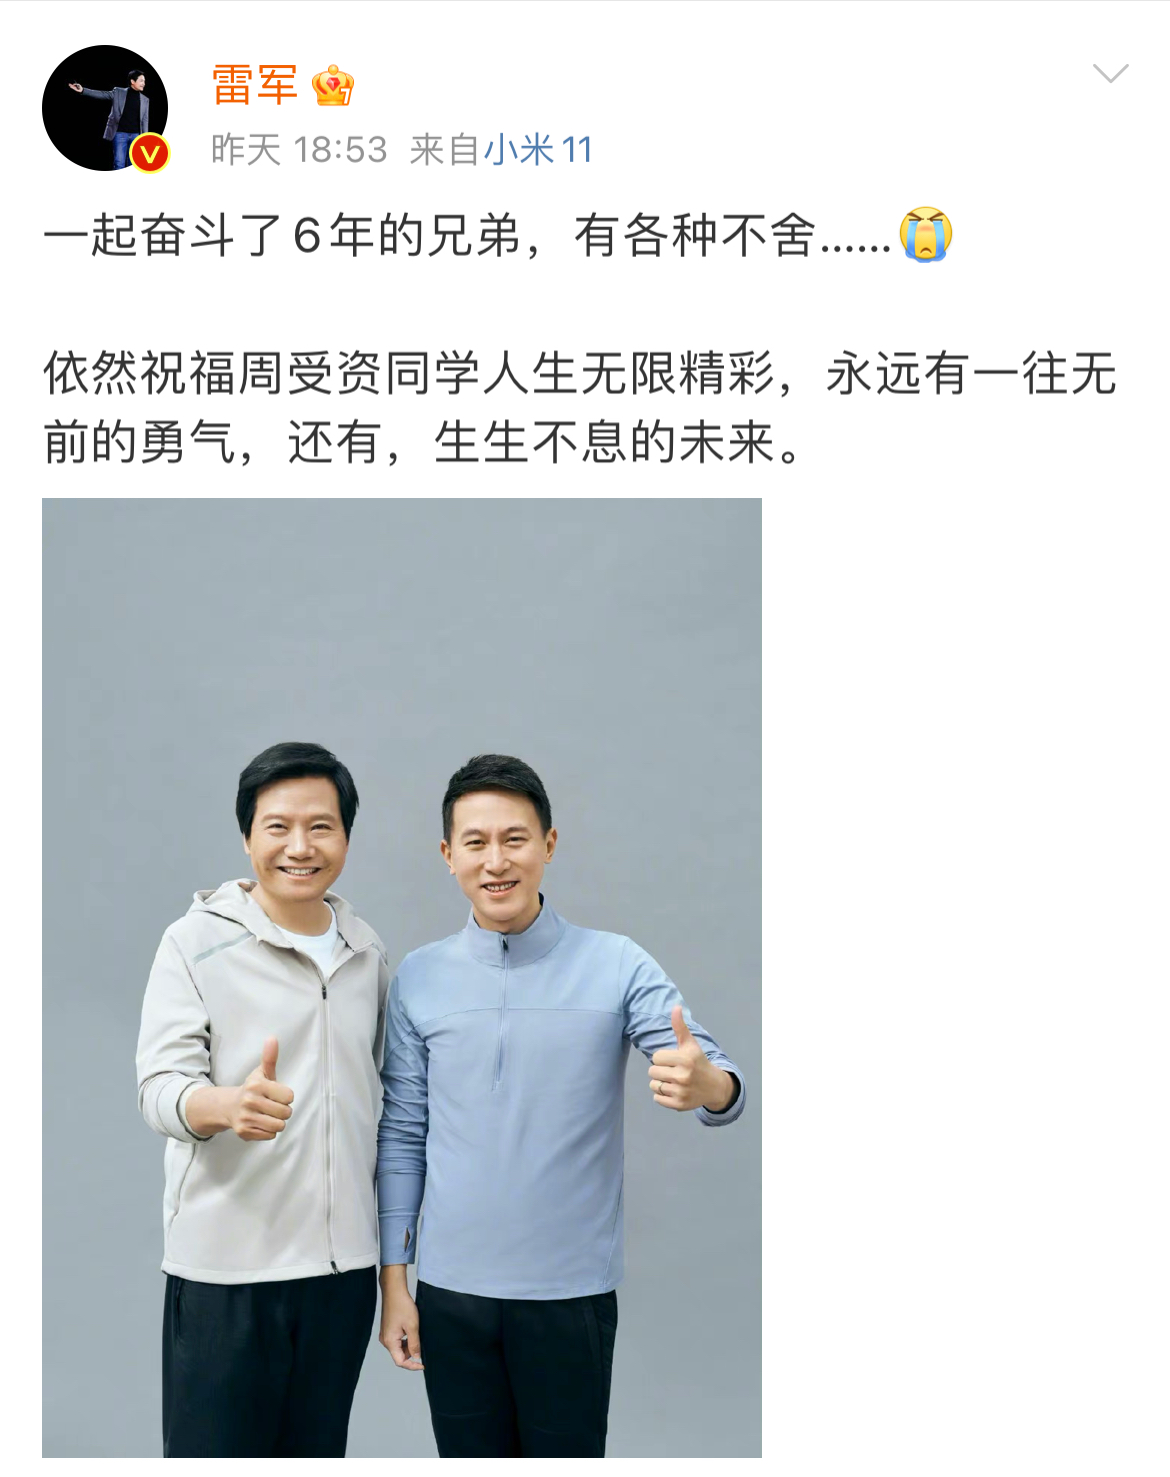 Millet hero week suffers endowment leave one's post, lei Jun what one says during a conversation makes a person touch